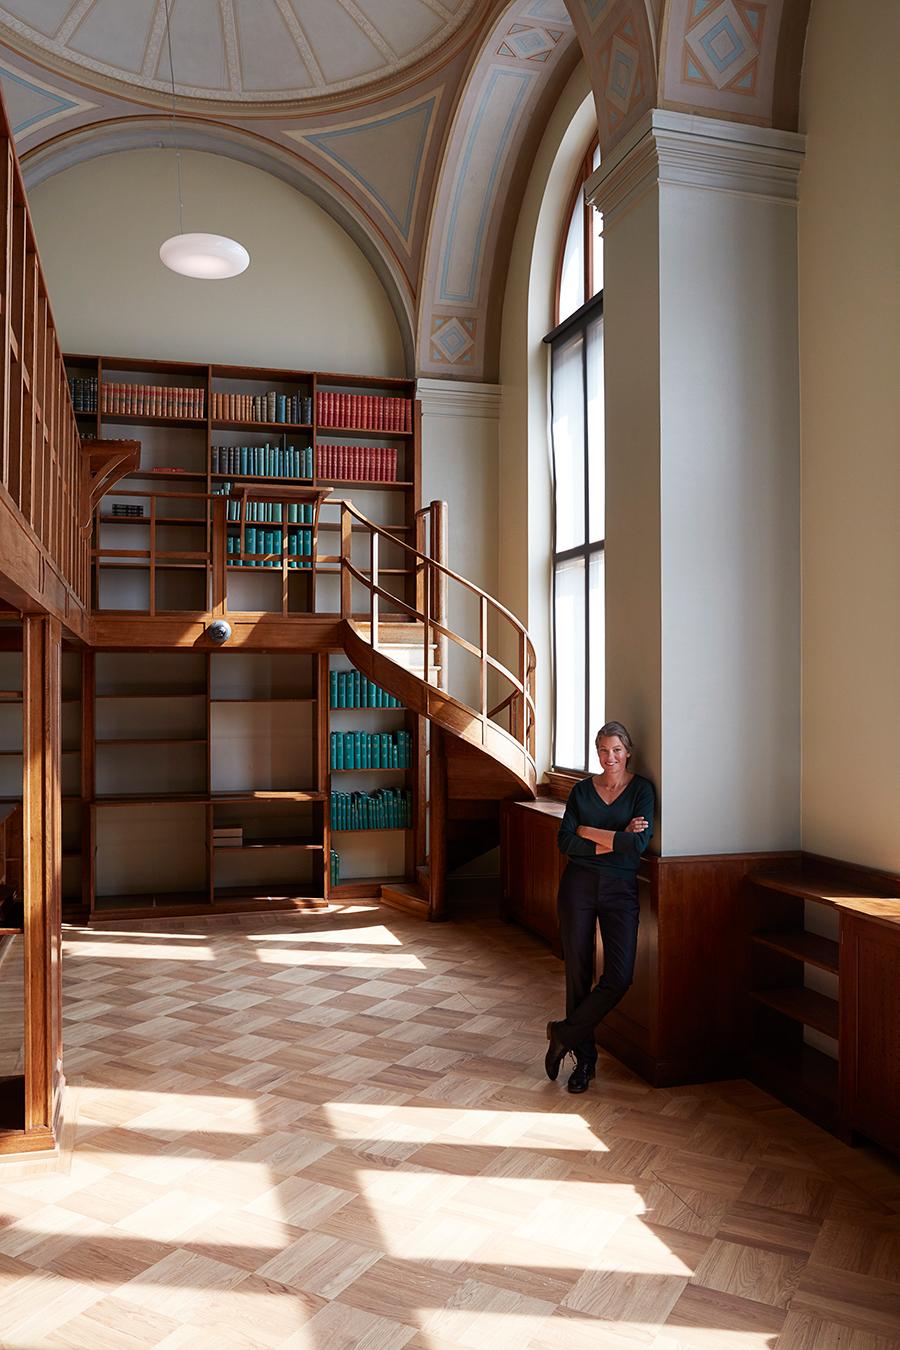 A Look at Emma Olbers’ New Designs for the Old Library of Stockholm’s Nationalmuseum